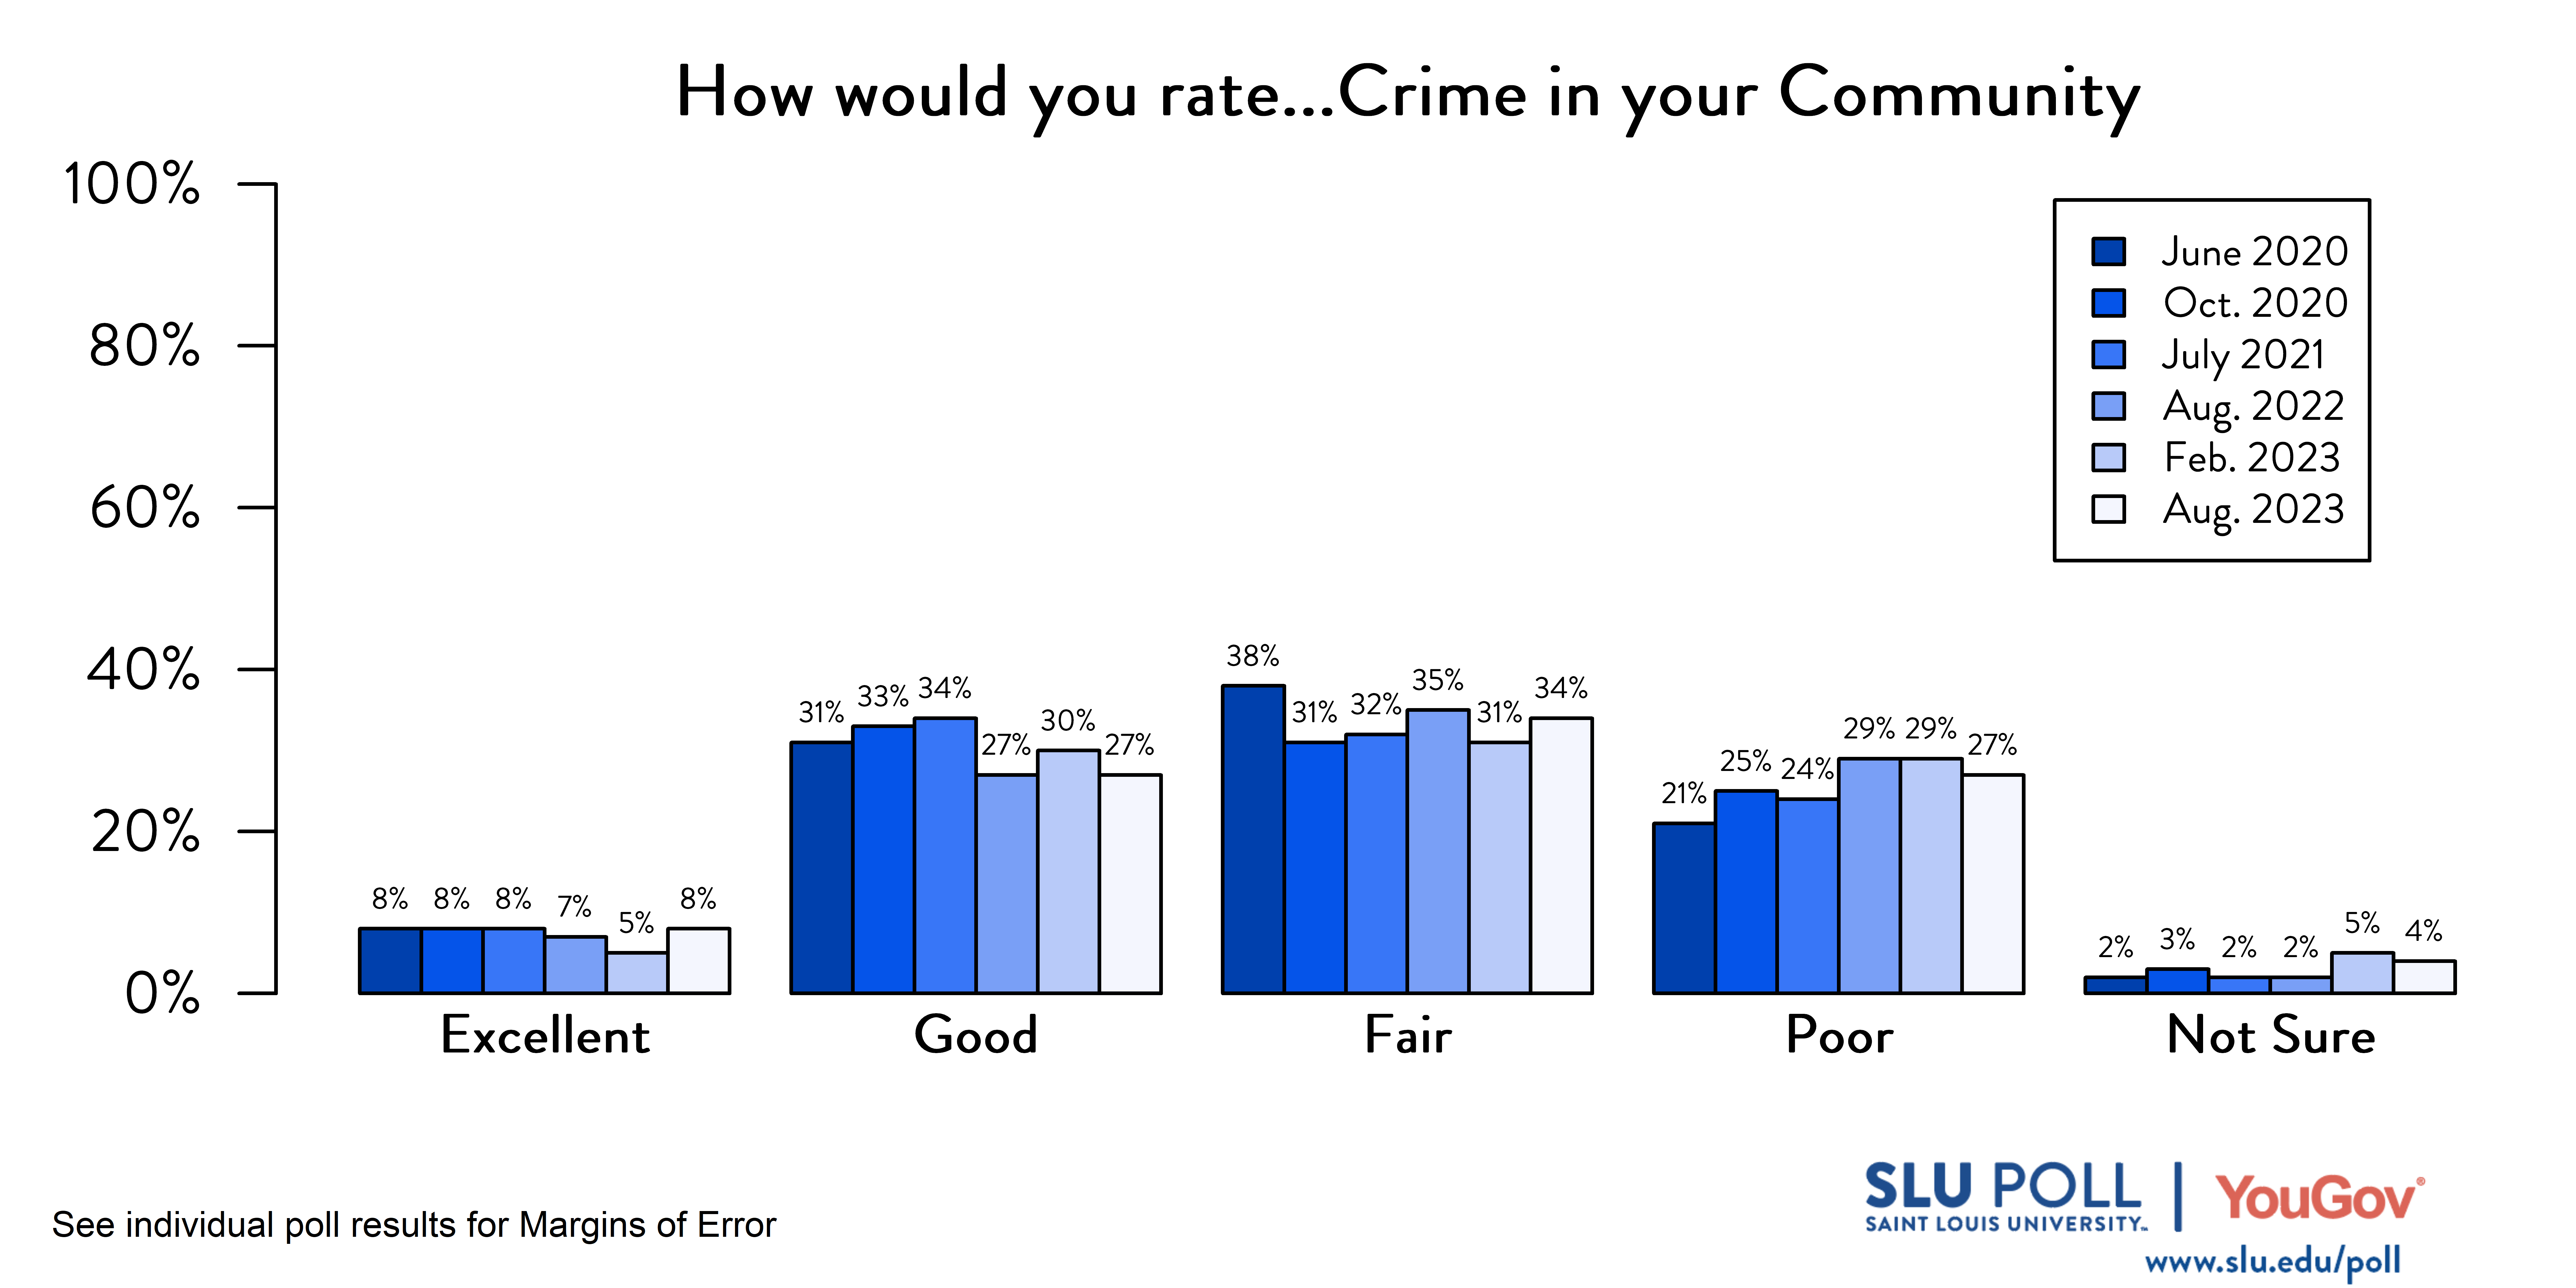 Likely voters' responses to 'How would you rate the condition of the following: Crime in your community?'. June 2020 Voter Responses 8% Excellent, 31% Good, 38% Fair, 21% Poor, and 2% Not Sure. October 2020 Voter Responses: 8% Excellent, 33% Good, 31% Fair, 25% Poor, and 3% Not sure. July 2021 Voter Responses: 8% Excellent, 34% Good, 32% Fair, 24% Poor, and 2% Not sure. August 2022 Voter Responses: 7% Excellent, 27% Good, 35% Fair, 29% Poor, and 2% Not sure. February 2023 Voter Responses: 5% Excellent, 30% Good, 31% Fair, 29% Poor, and 5% Not sure. August 2023 Voter Responses: 8% Excellent, 27% Good, 34% Fair, 27% Poor, and 4% Not sure.